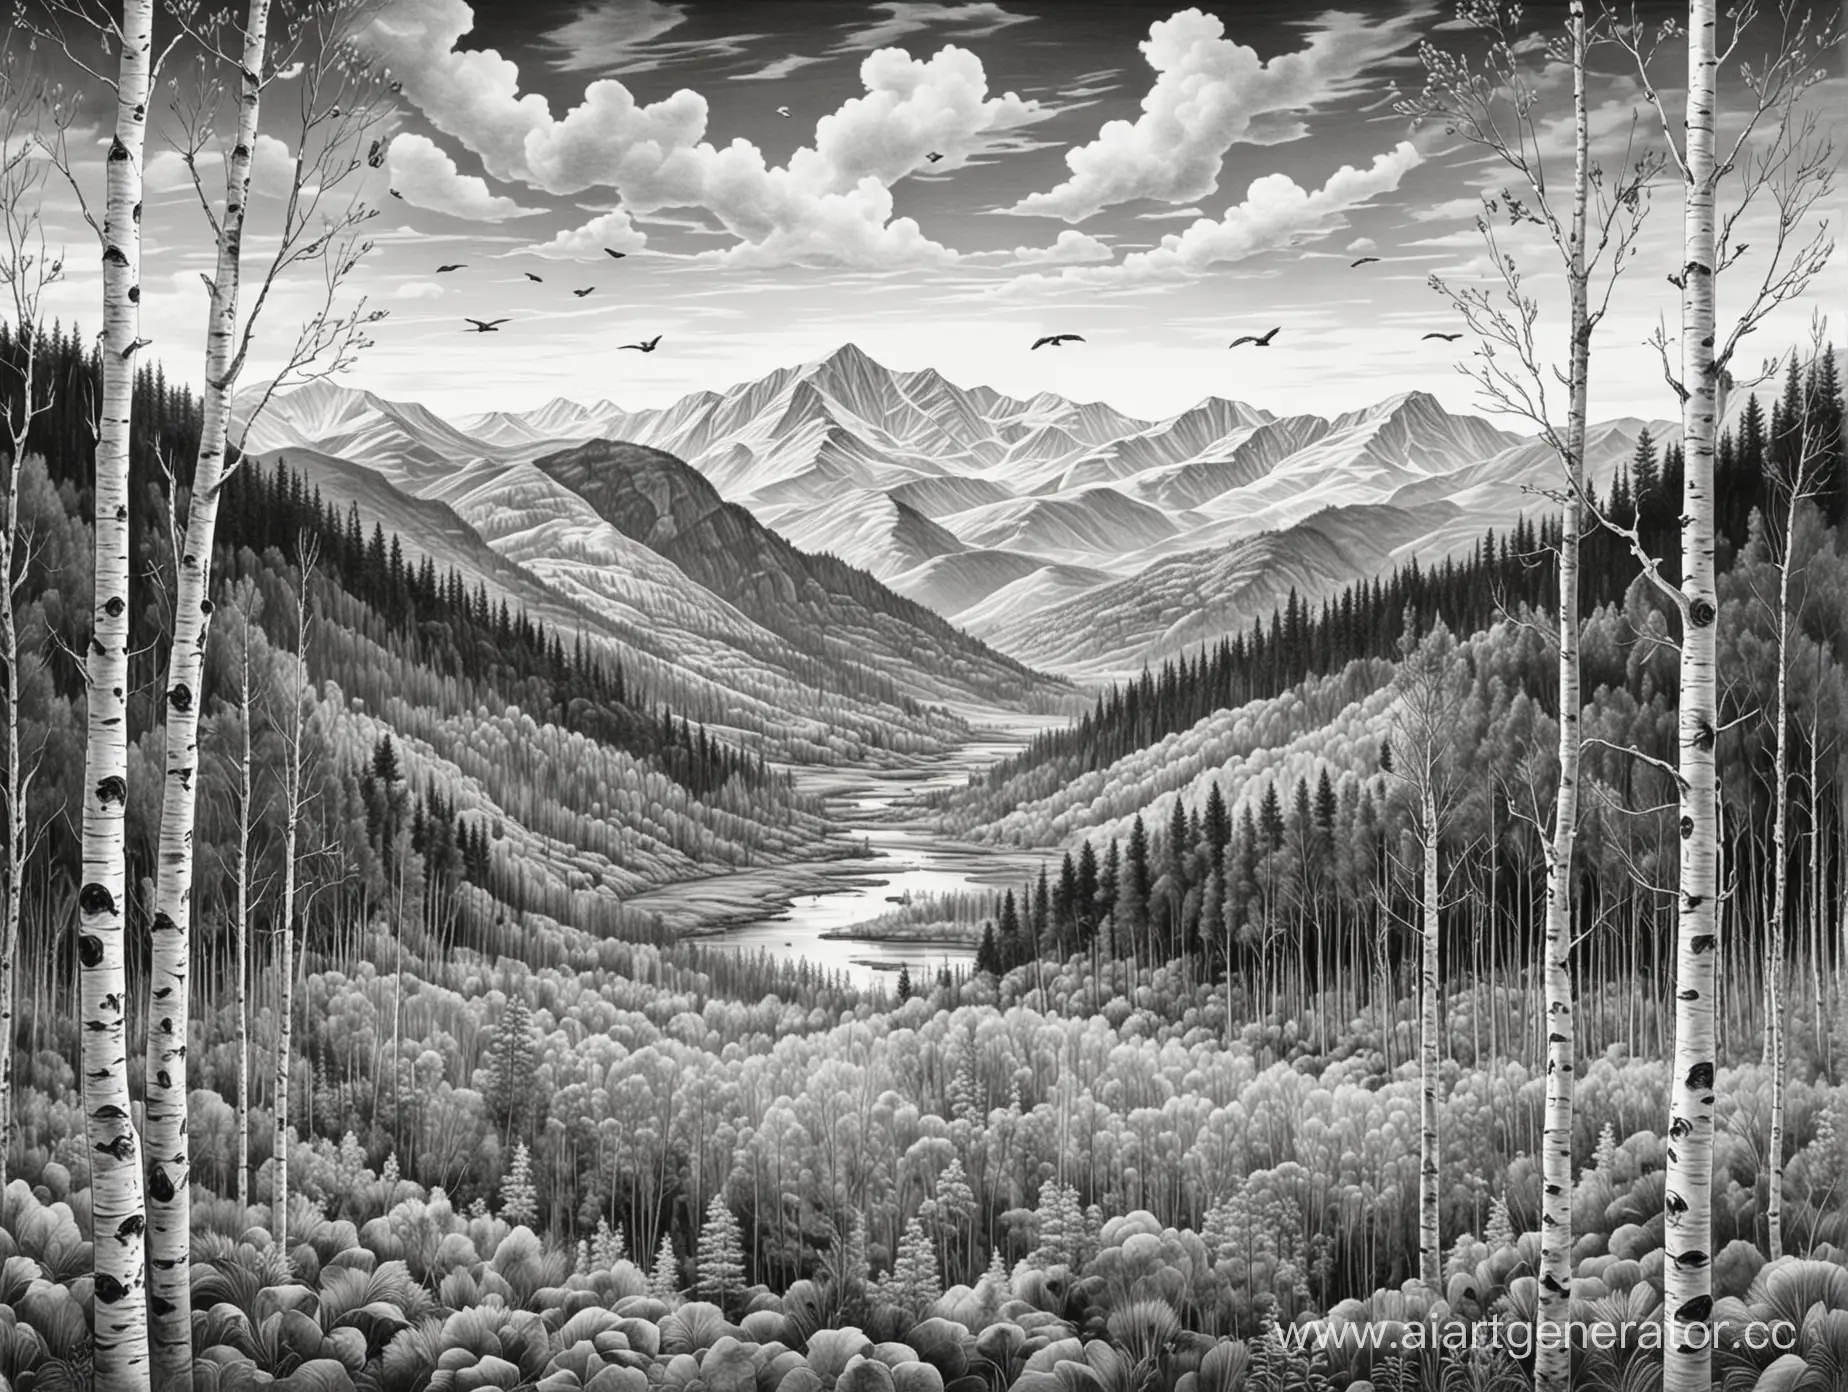 Monochrome-Hatched-Drawing-of-Birch-Pine-and-Aspen-Trees-in-Forest-with-Mountains-and-Birds